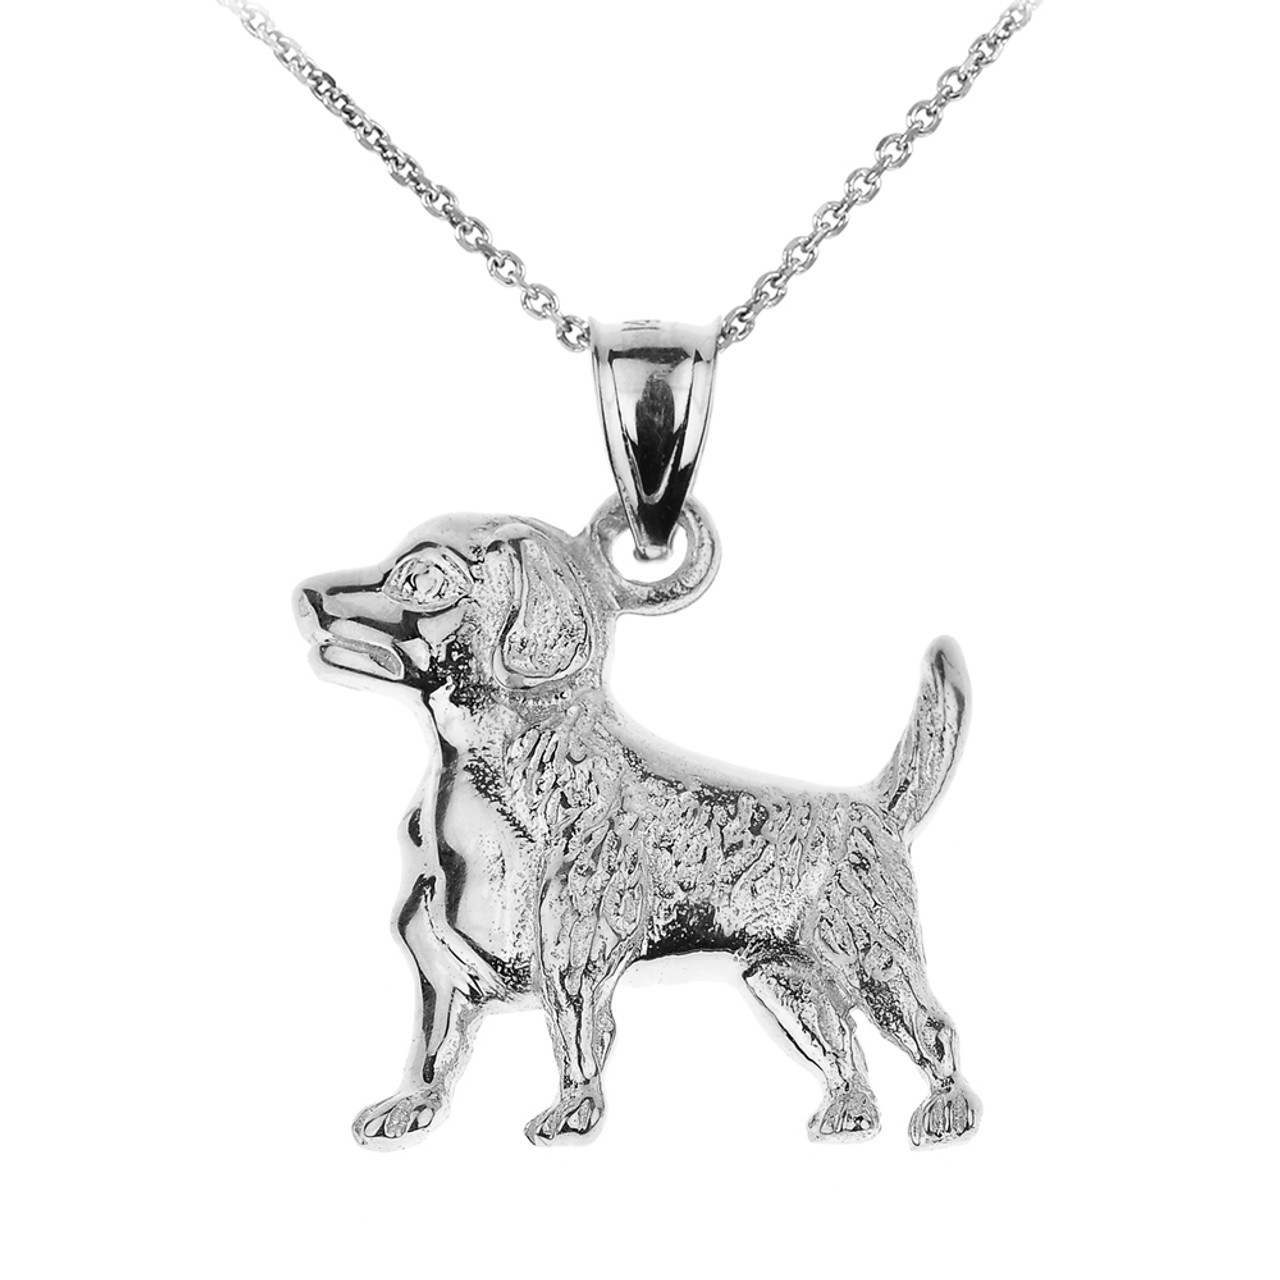  925 Sterling Silver Animal Necklace Charm Pendant with